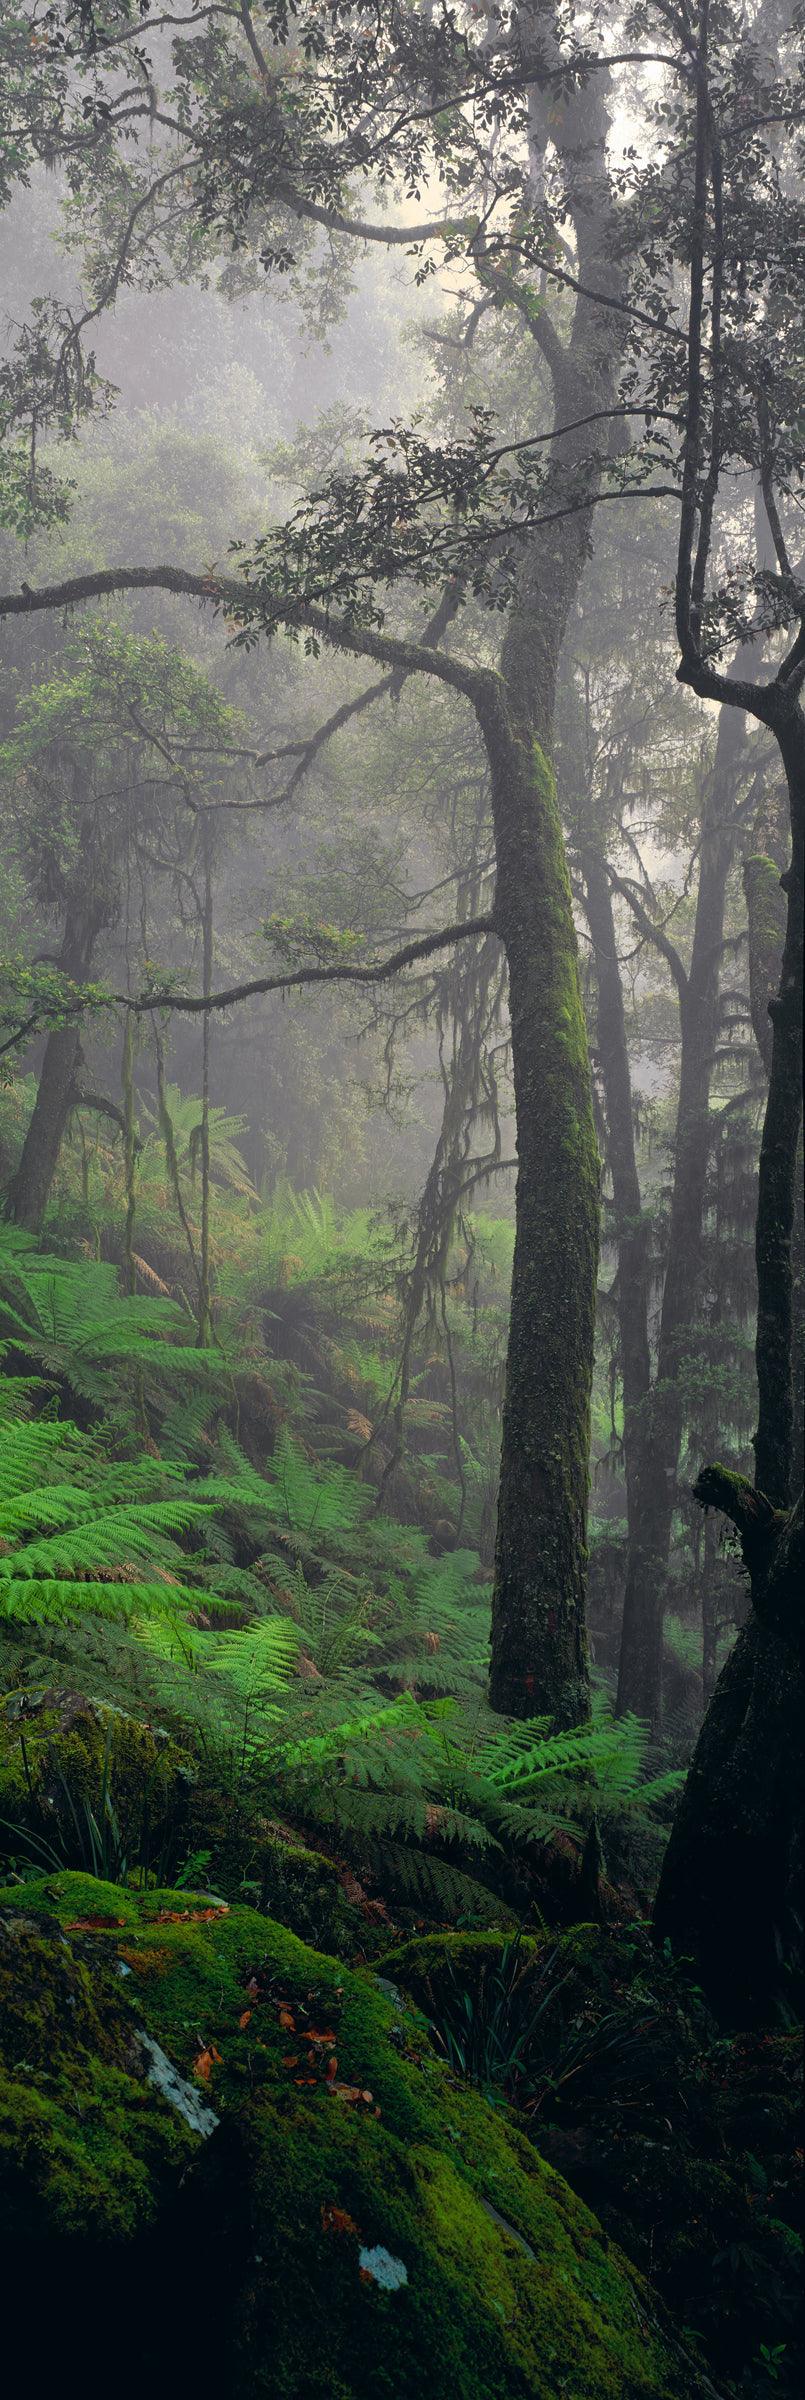 Misty rainforest filled with trees mossy boulders and foliage in the Dorrigo National Park Australia